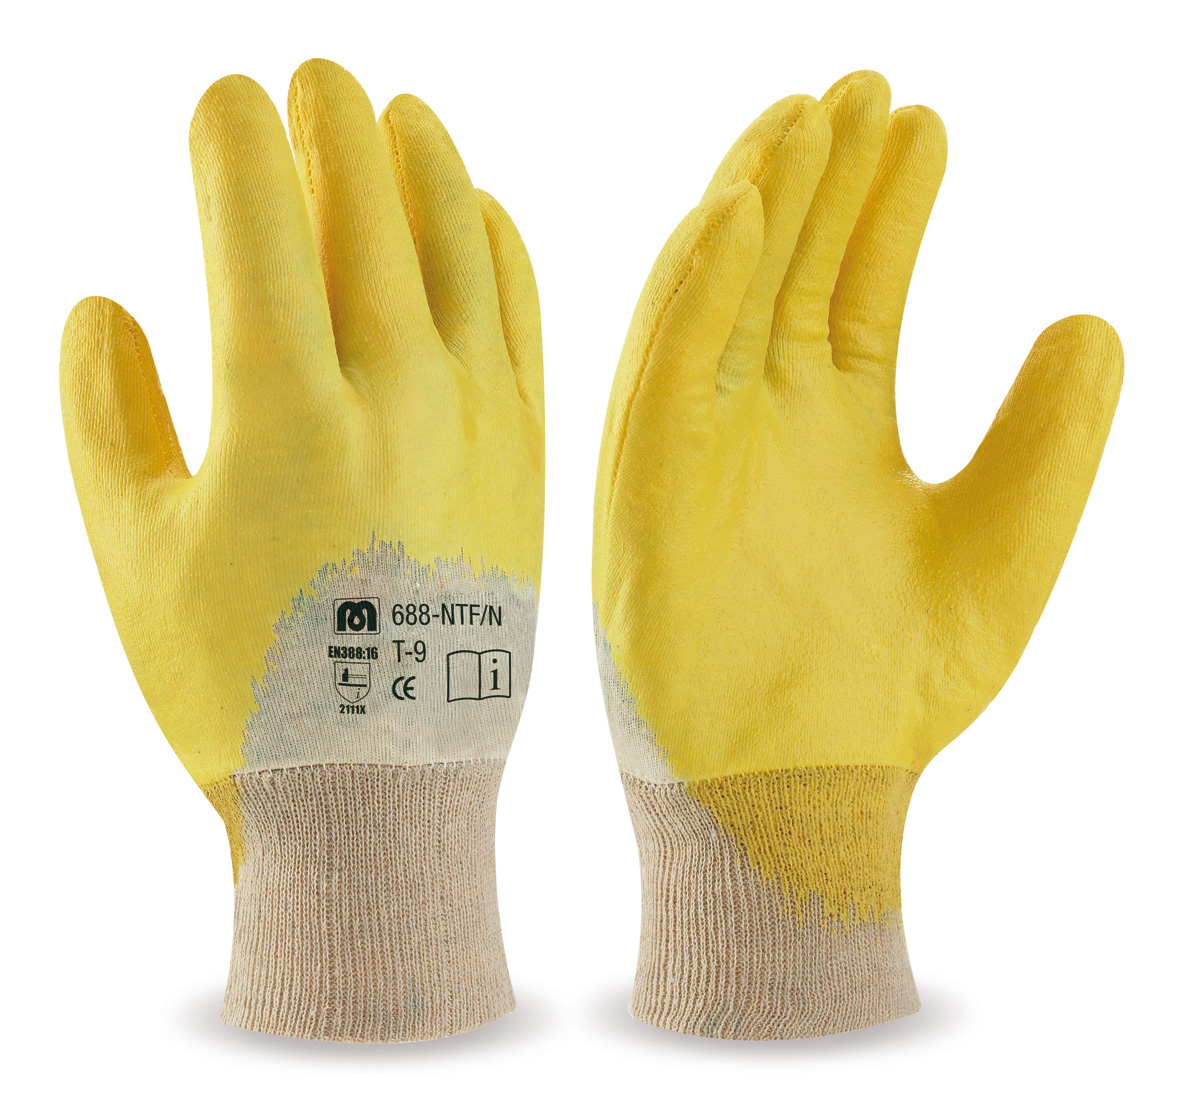 688-NTF/N Work Gloves Nitrile With Support  Breathable back. Flexible Nitrile Glove with knitted cotton support and elastic cuff.
